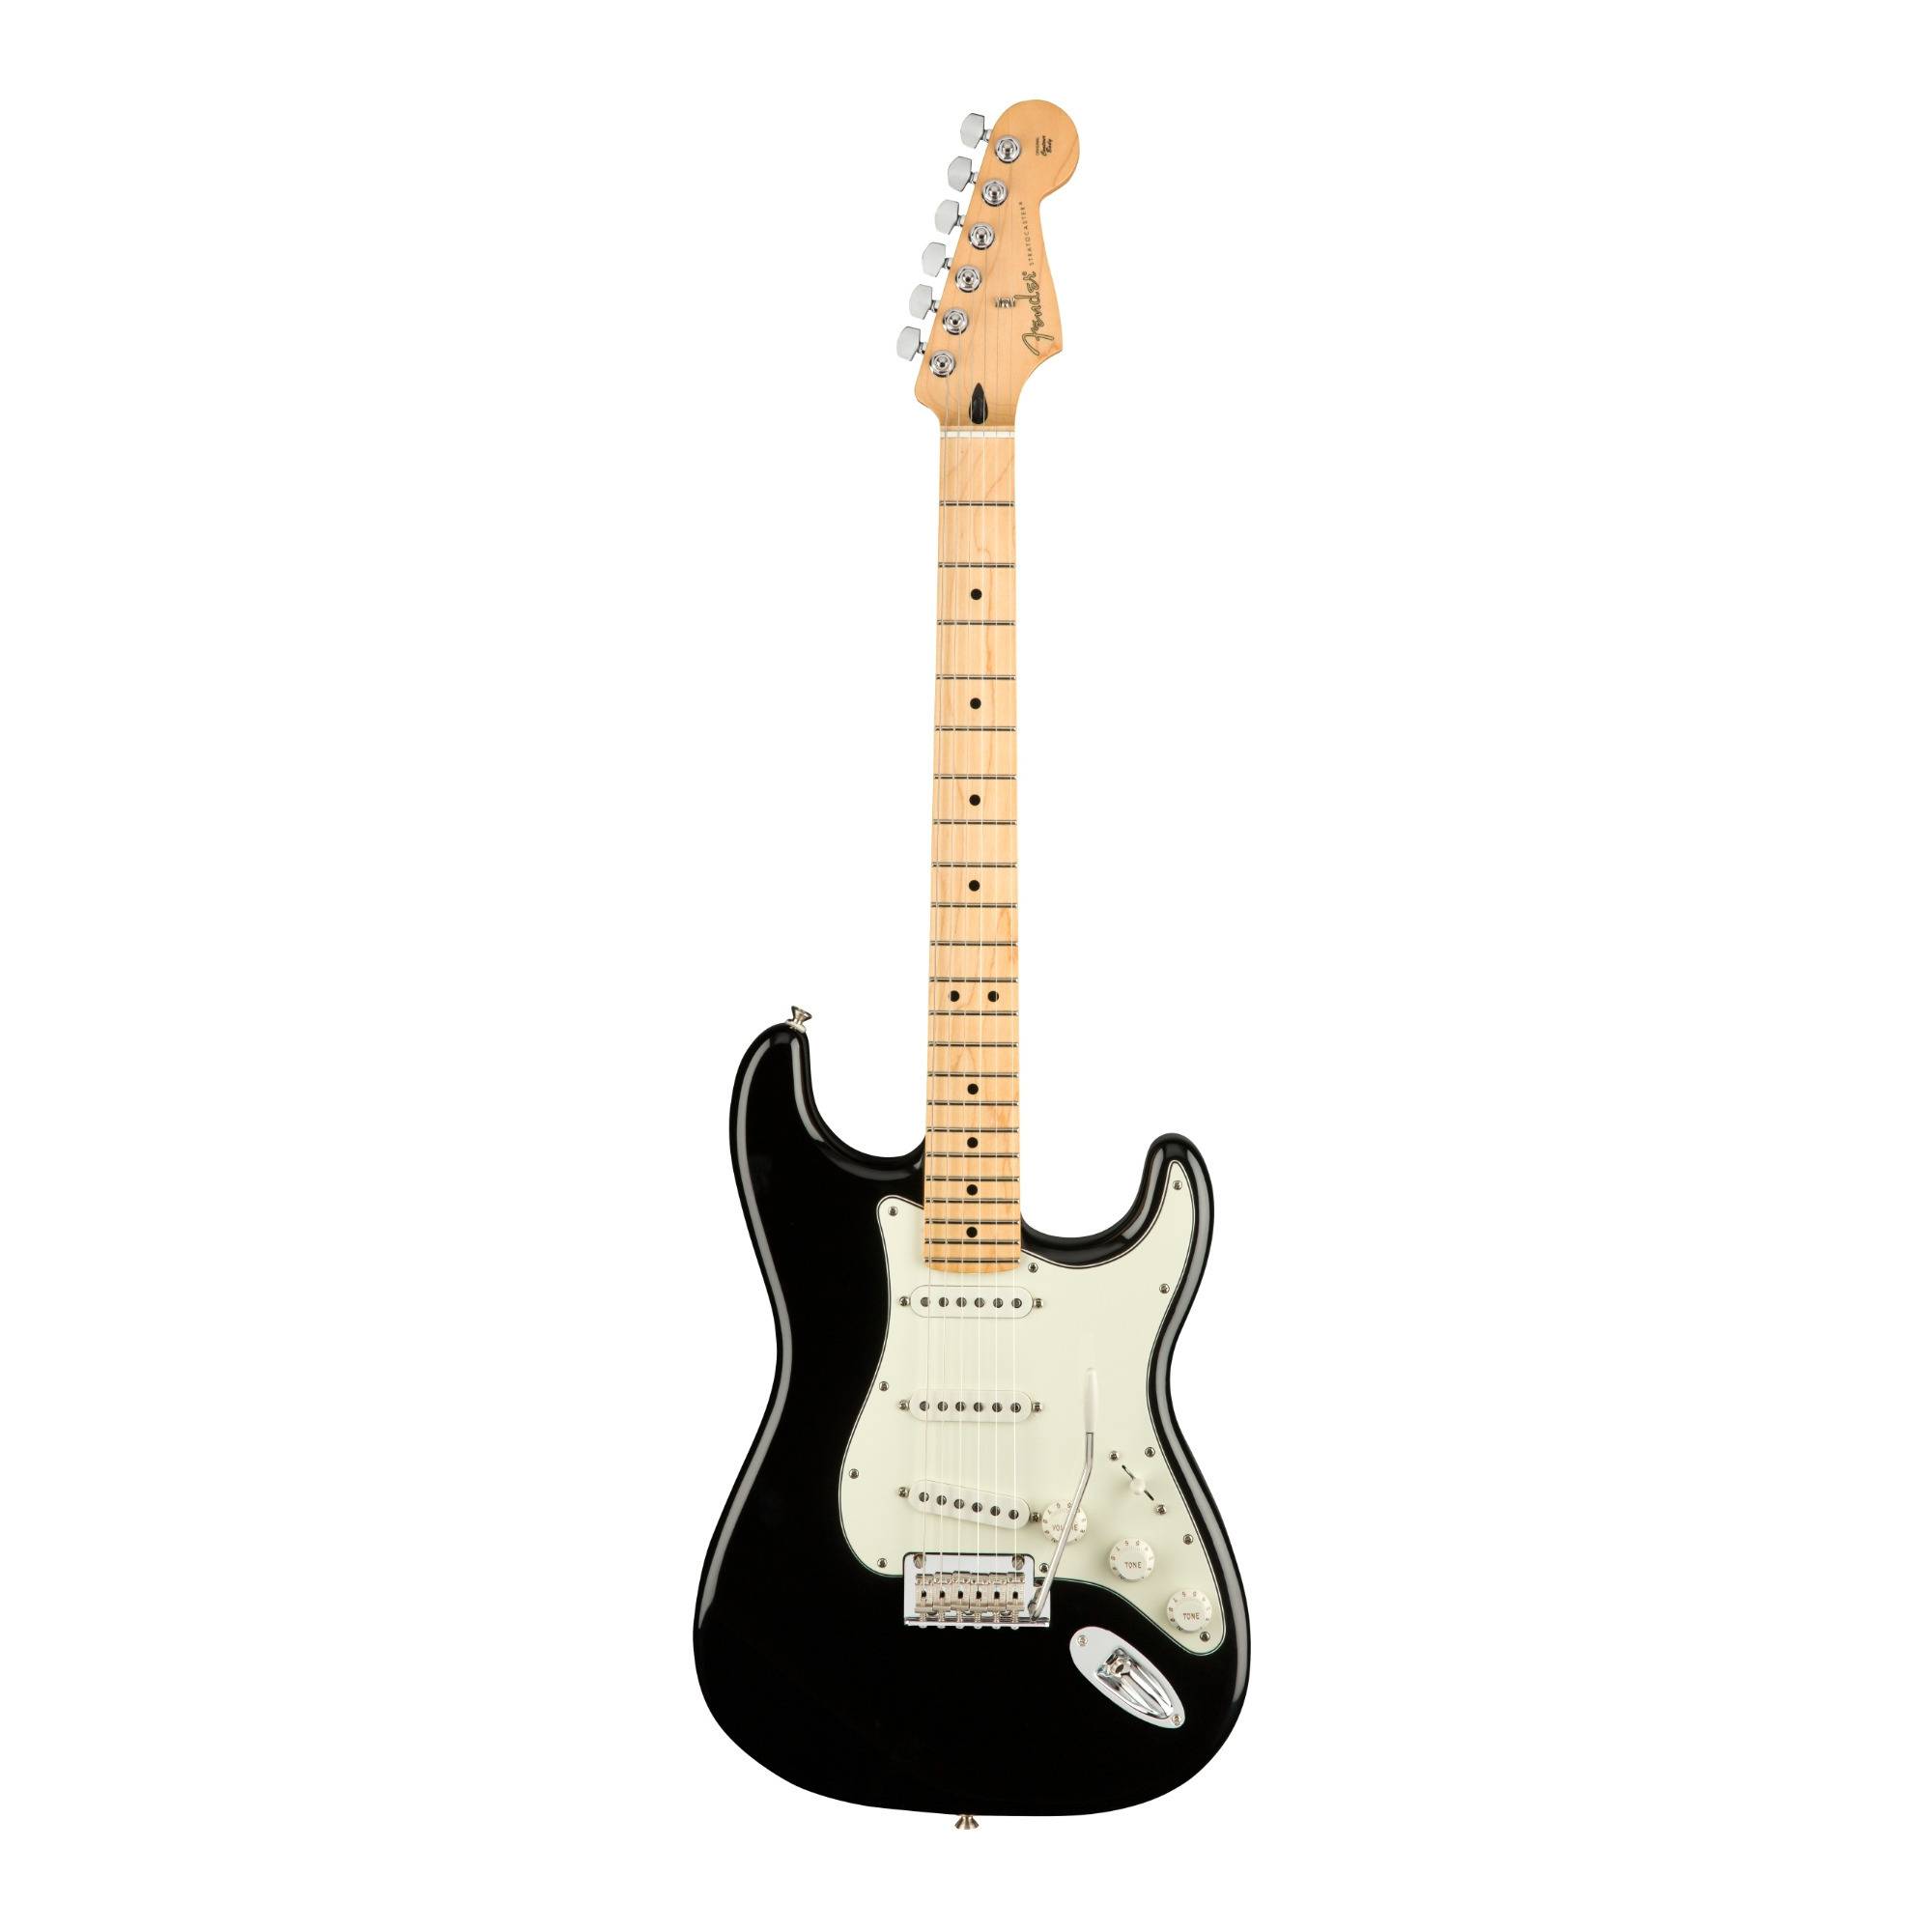 Fender Player Series Stratocaster 6-String Electric Guitar (Right Hand, Black)